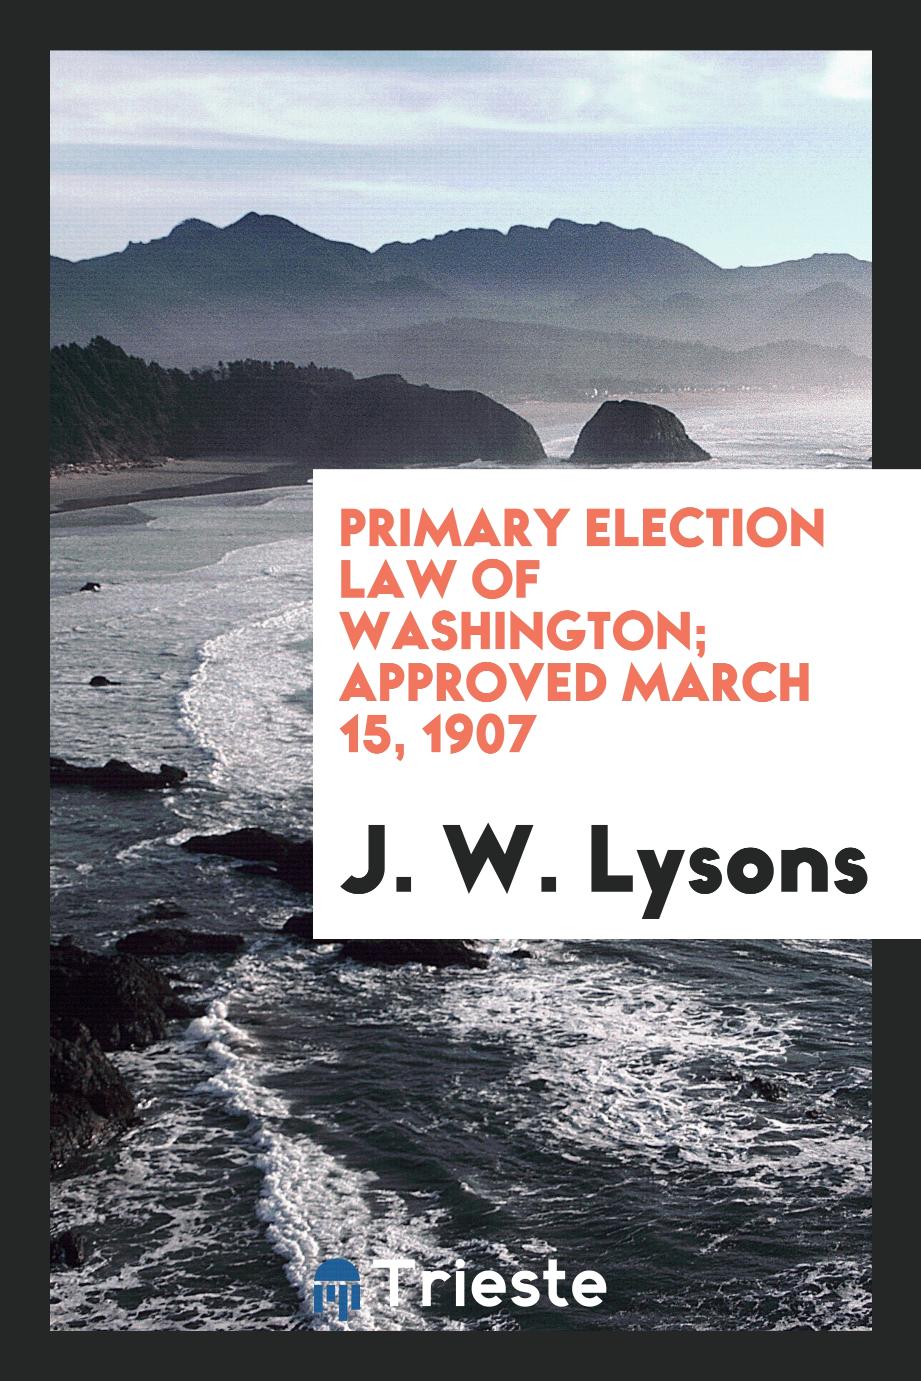 Primary Election Law of Washington; approved March 15, 1907